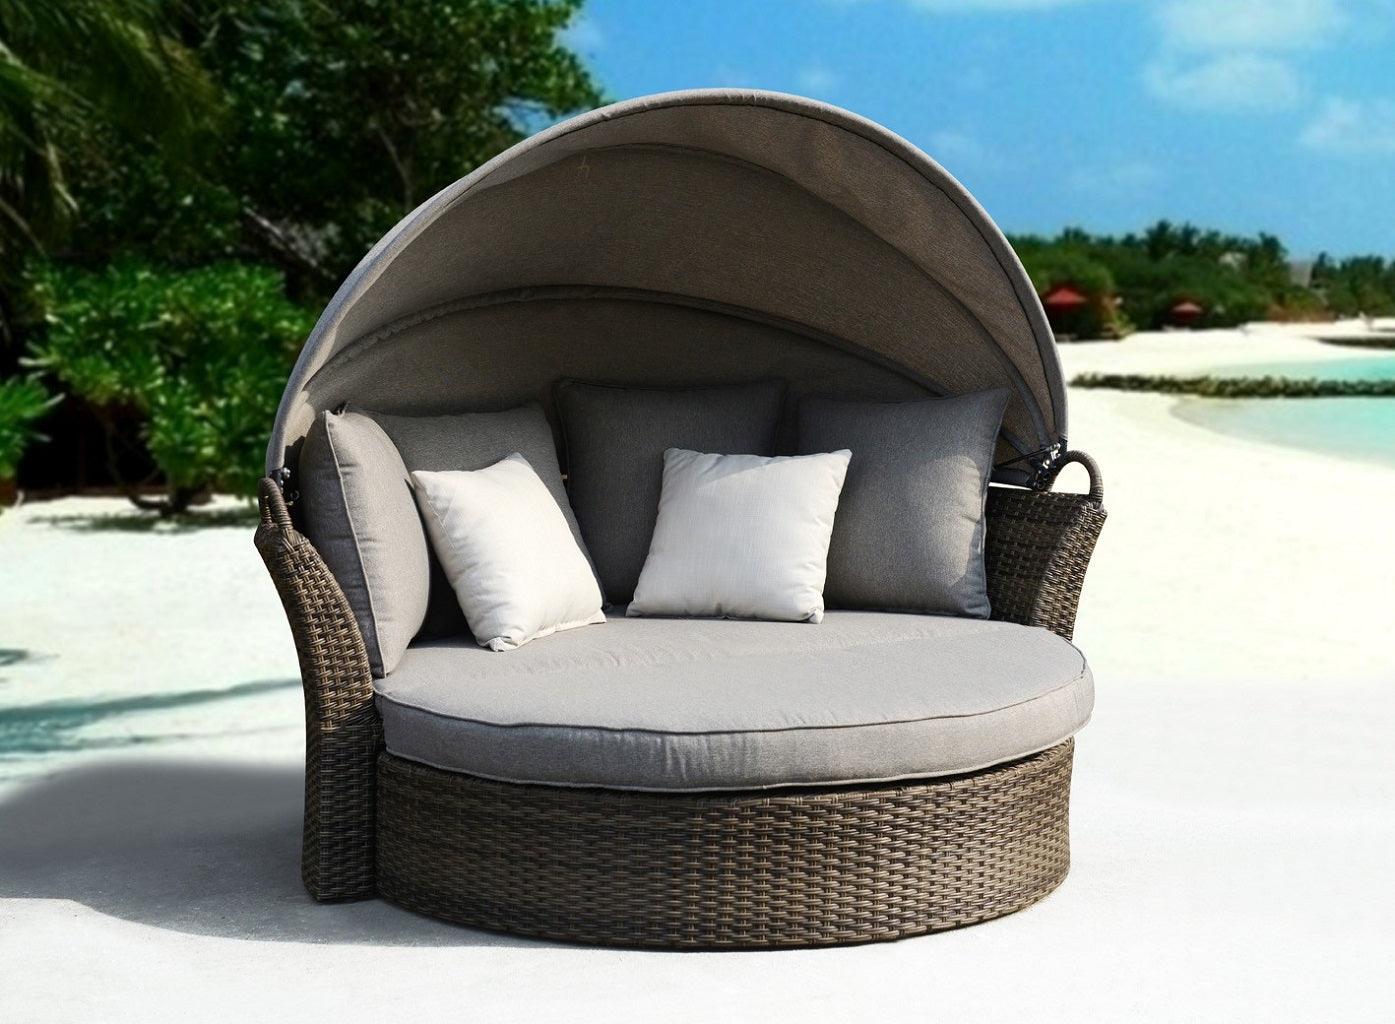 Big Tango Round Bed With Suncover - Anthracite/Light Grey